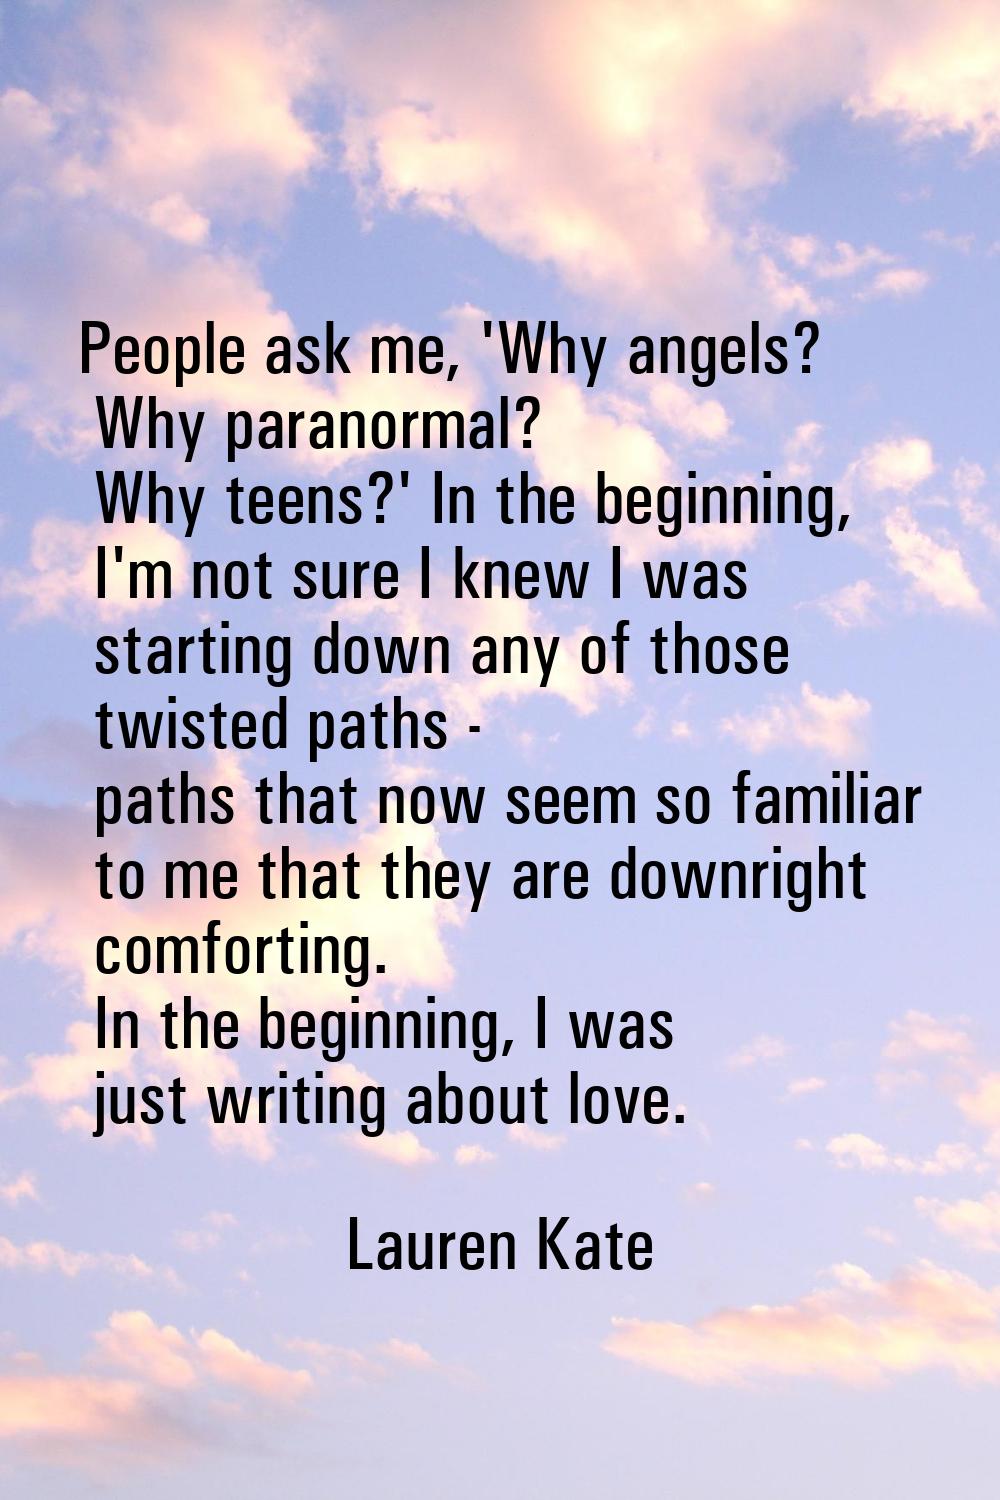 People ask me, 'Why angels? Why paranormal? Why teens?' In the beginning, I'm not sure I knew I was